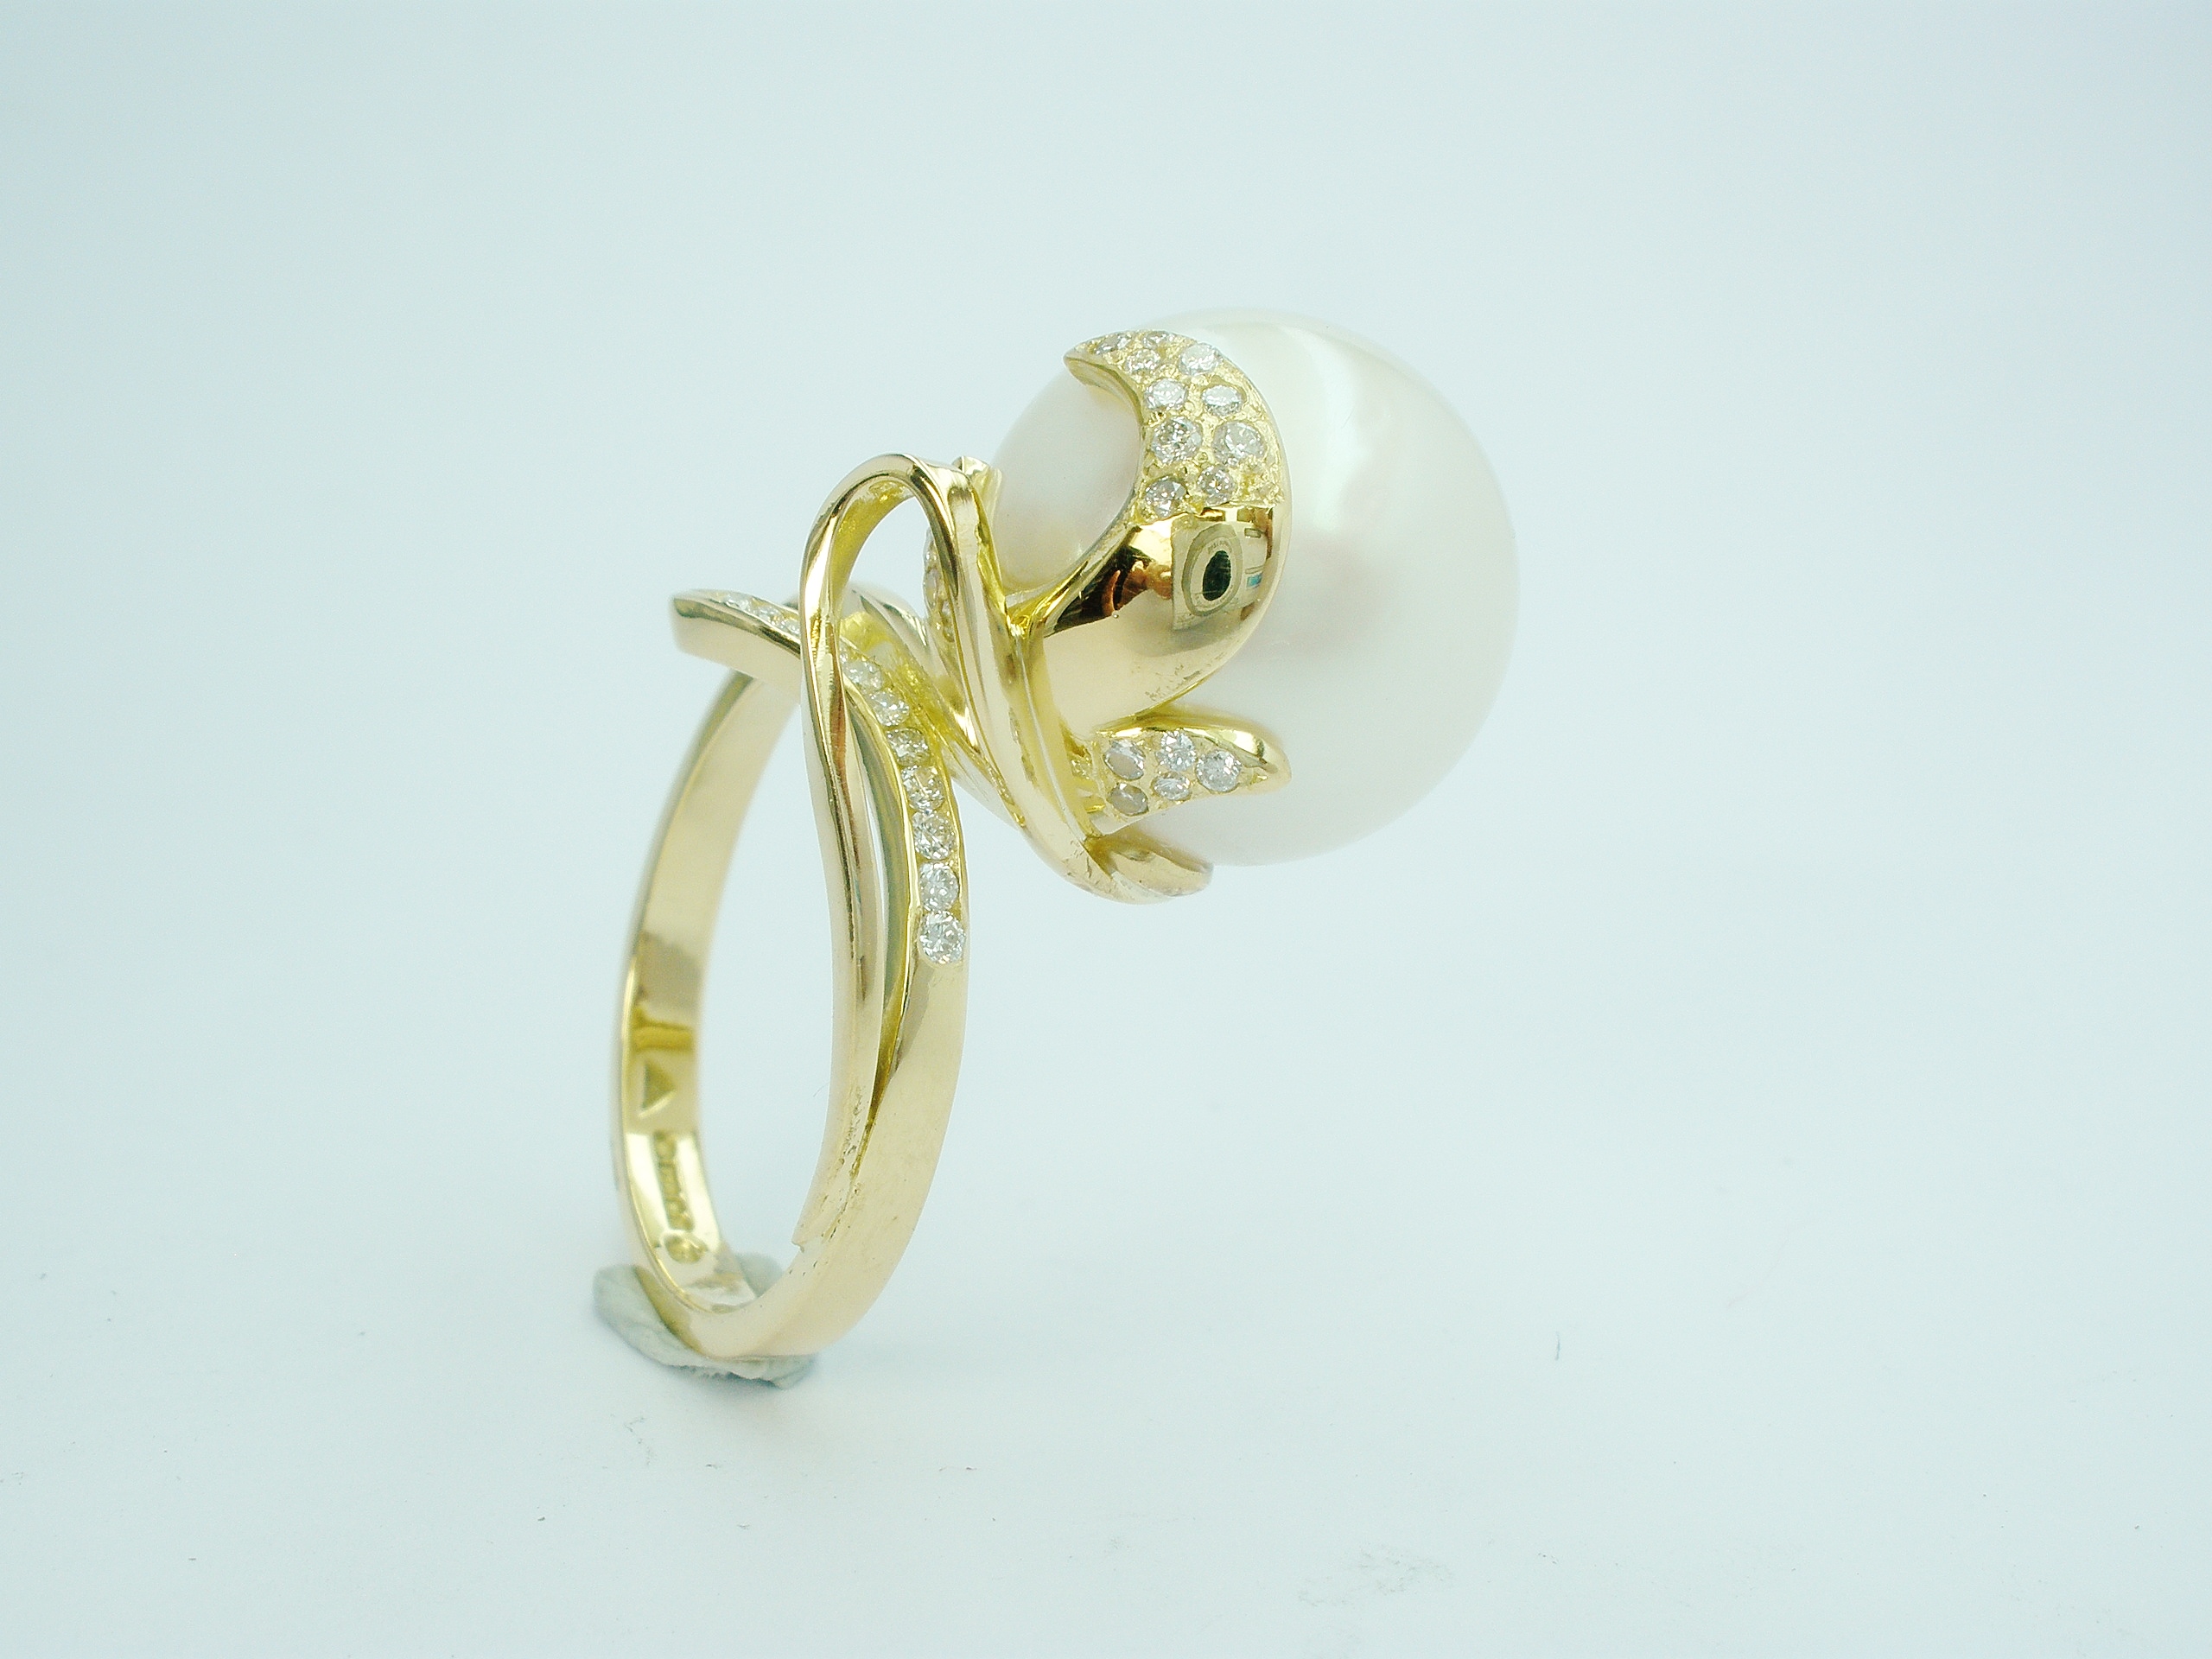 South Sea Pearl (14mm natural pearl) & diamond organically styled 18ct. yellow gold ring.